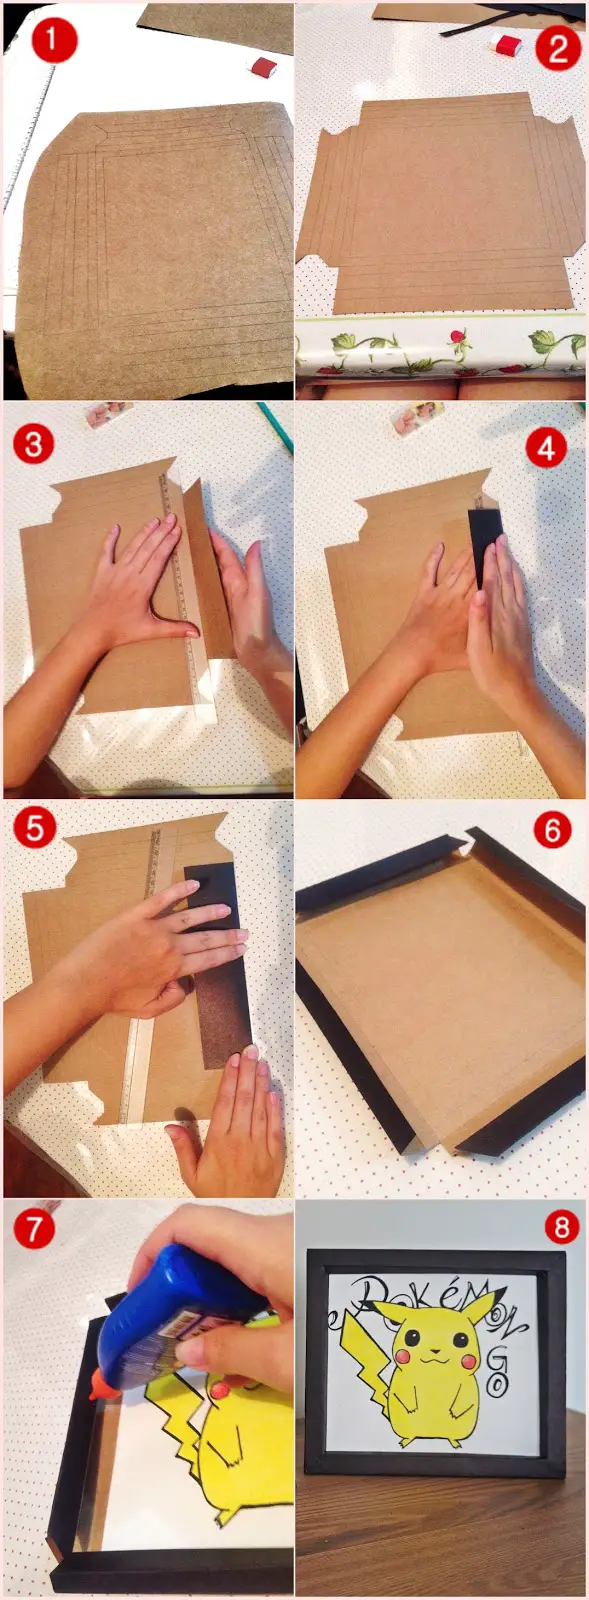 How to make a cardboard picture frame: Mold